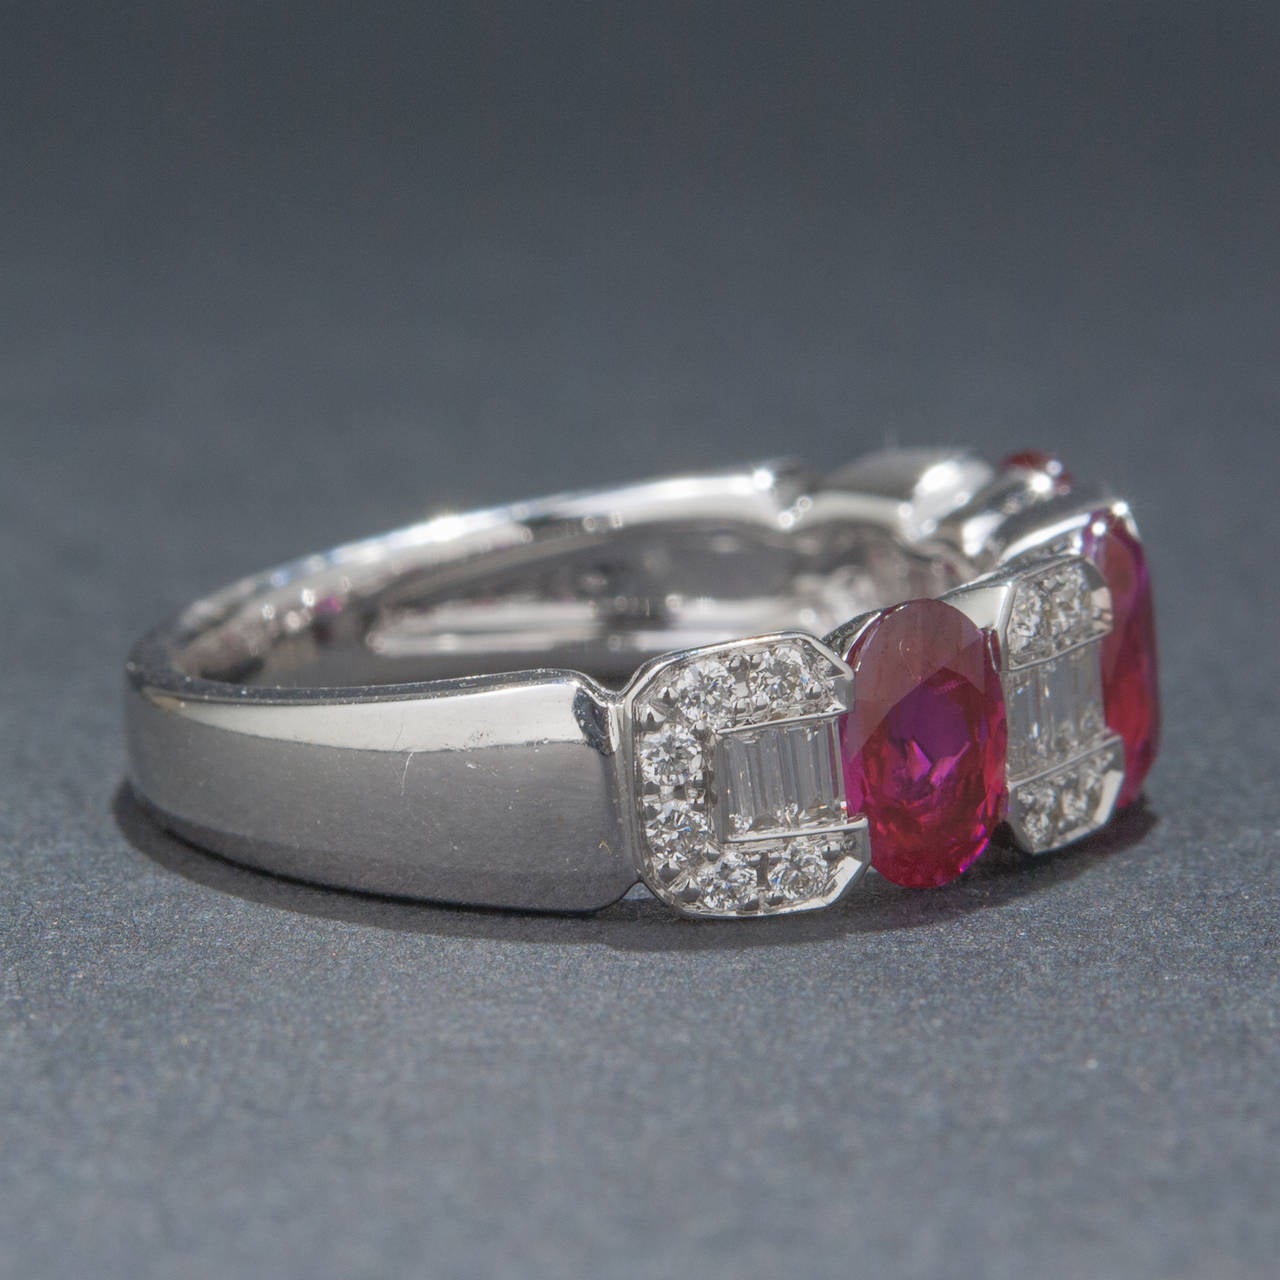 A gorgeous ruby and diamond half-eternity band made in eye-catching 18k white gold. This piece features 3 rubies for a total of 1.95 carats, 10 baguette cut diamonds for .17 total carats and 20 round brilliant diamonds for .18 total carats. The ring